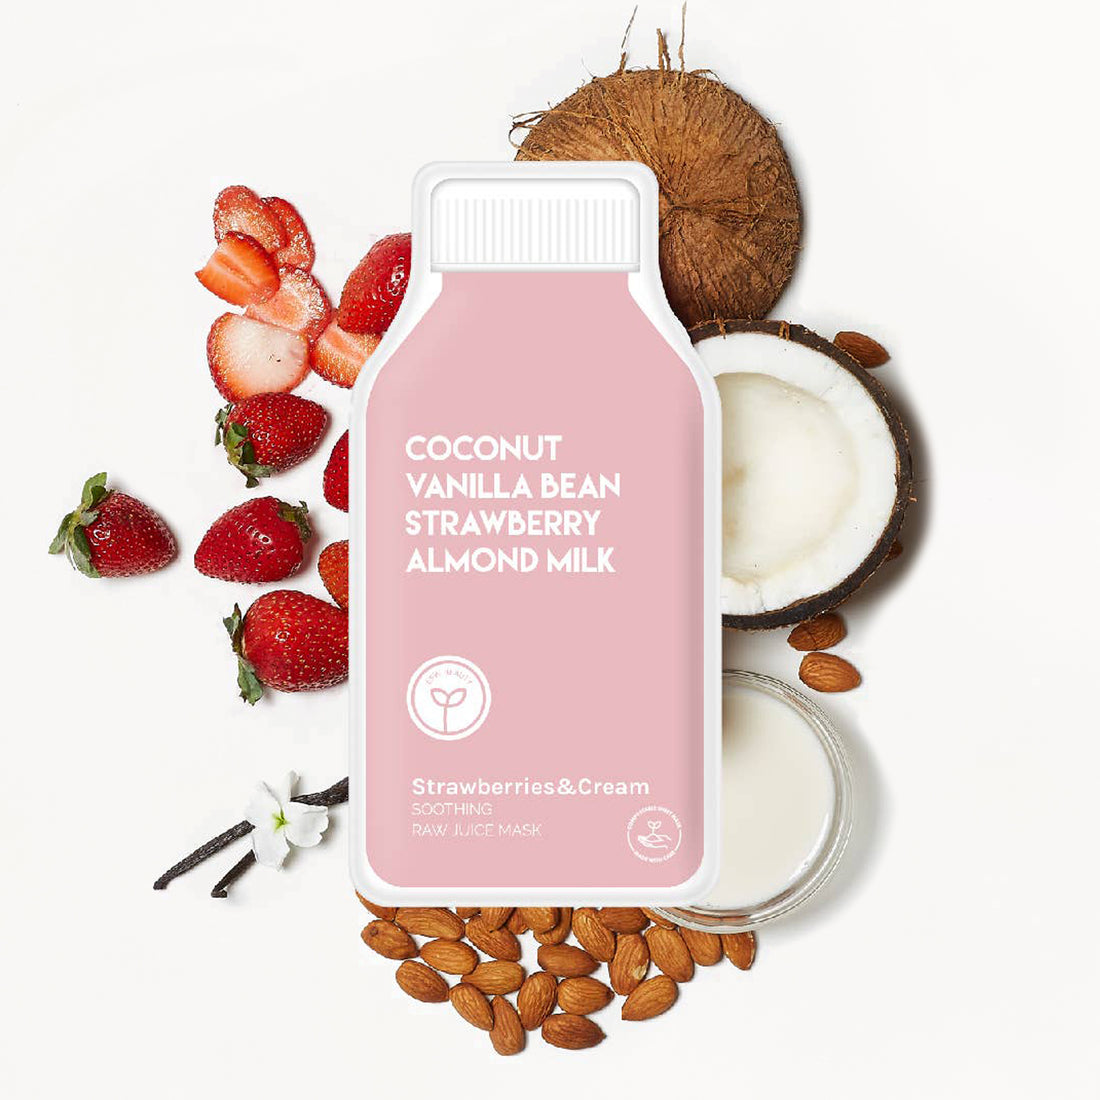 Strawberries and Cream Soothing Raw Juice Sheet Mask